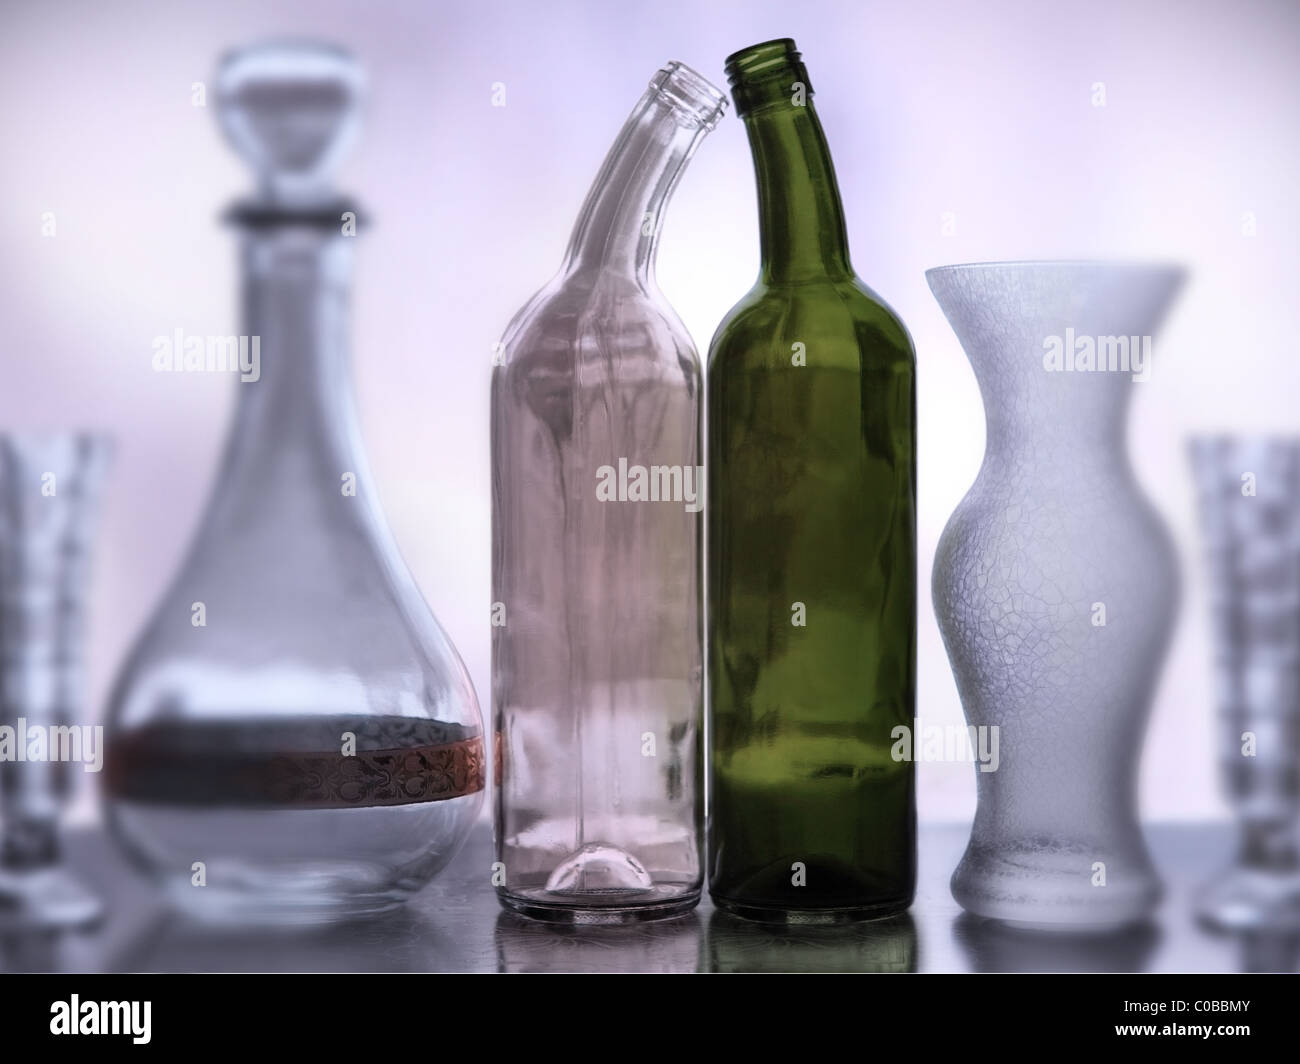 wine bottles straining their necks to touch each other among different glass containers. Stock Photo